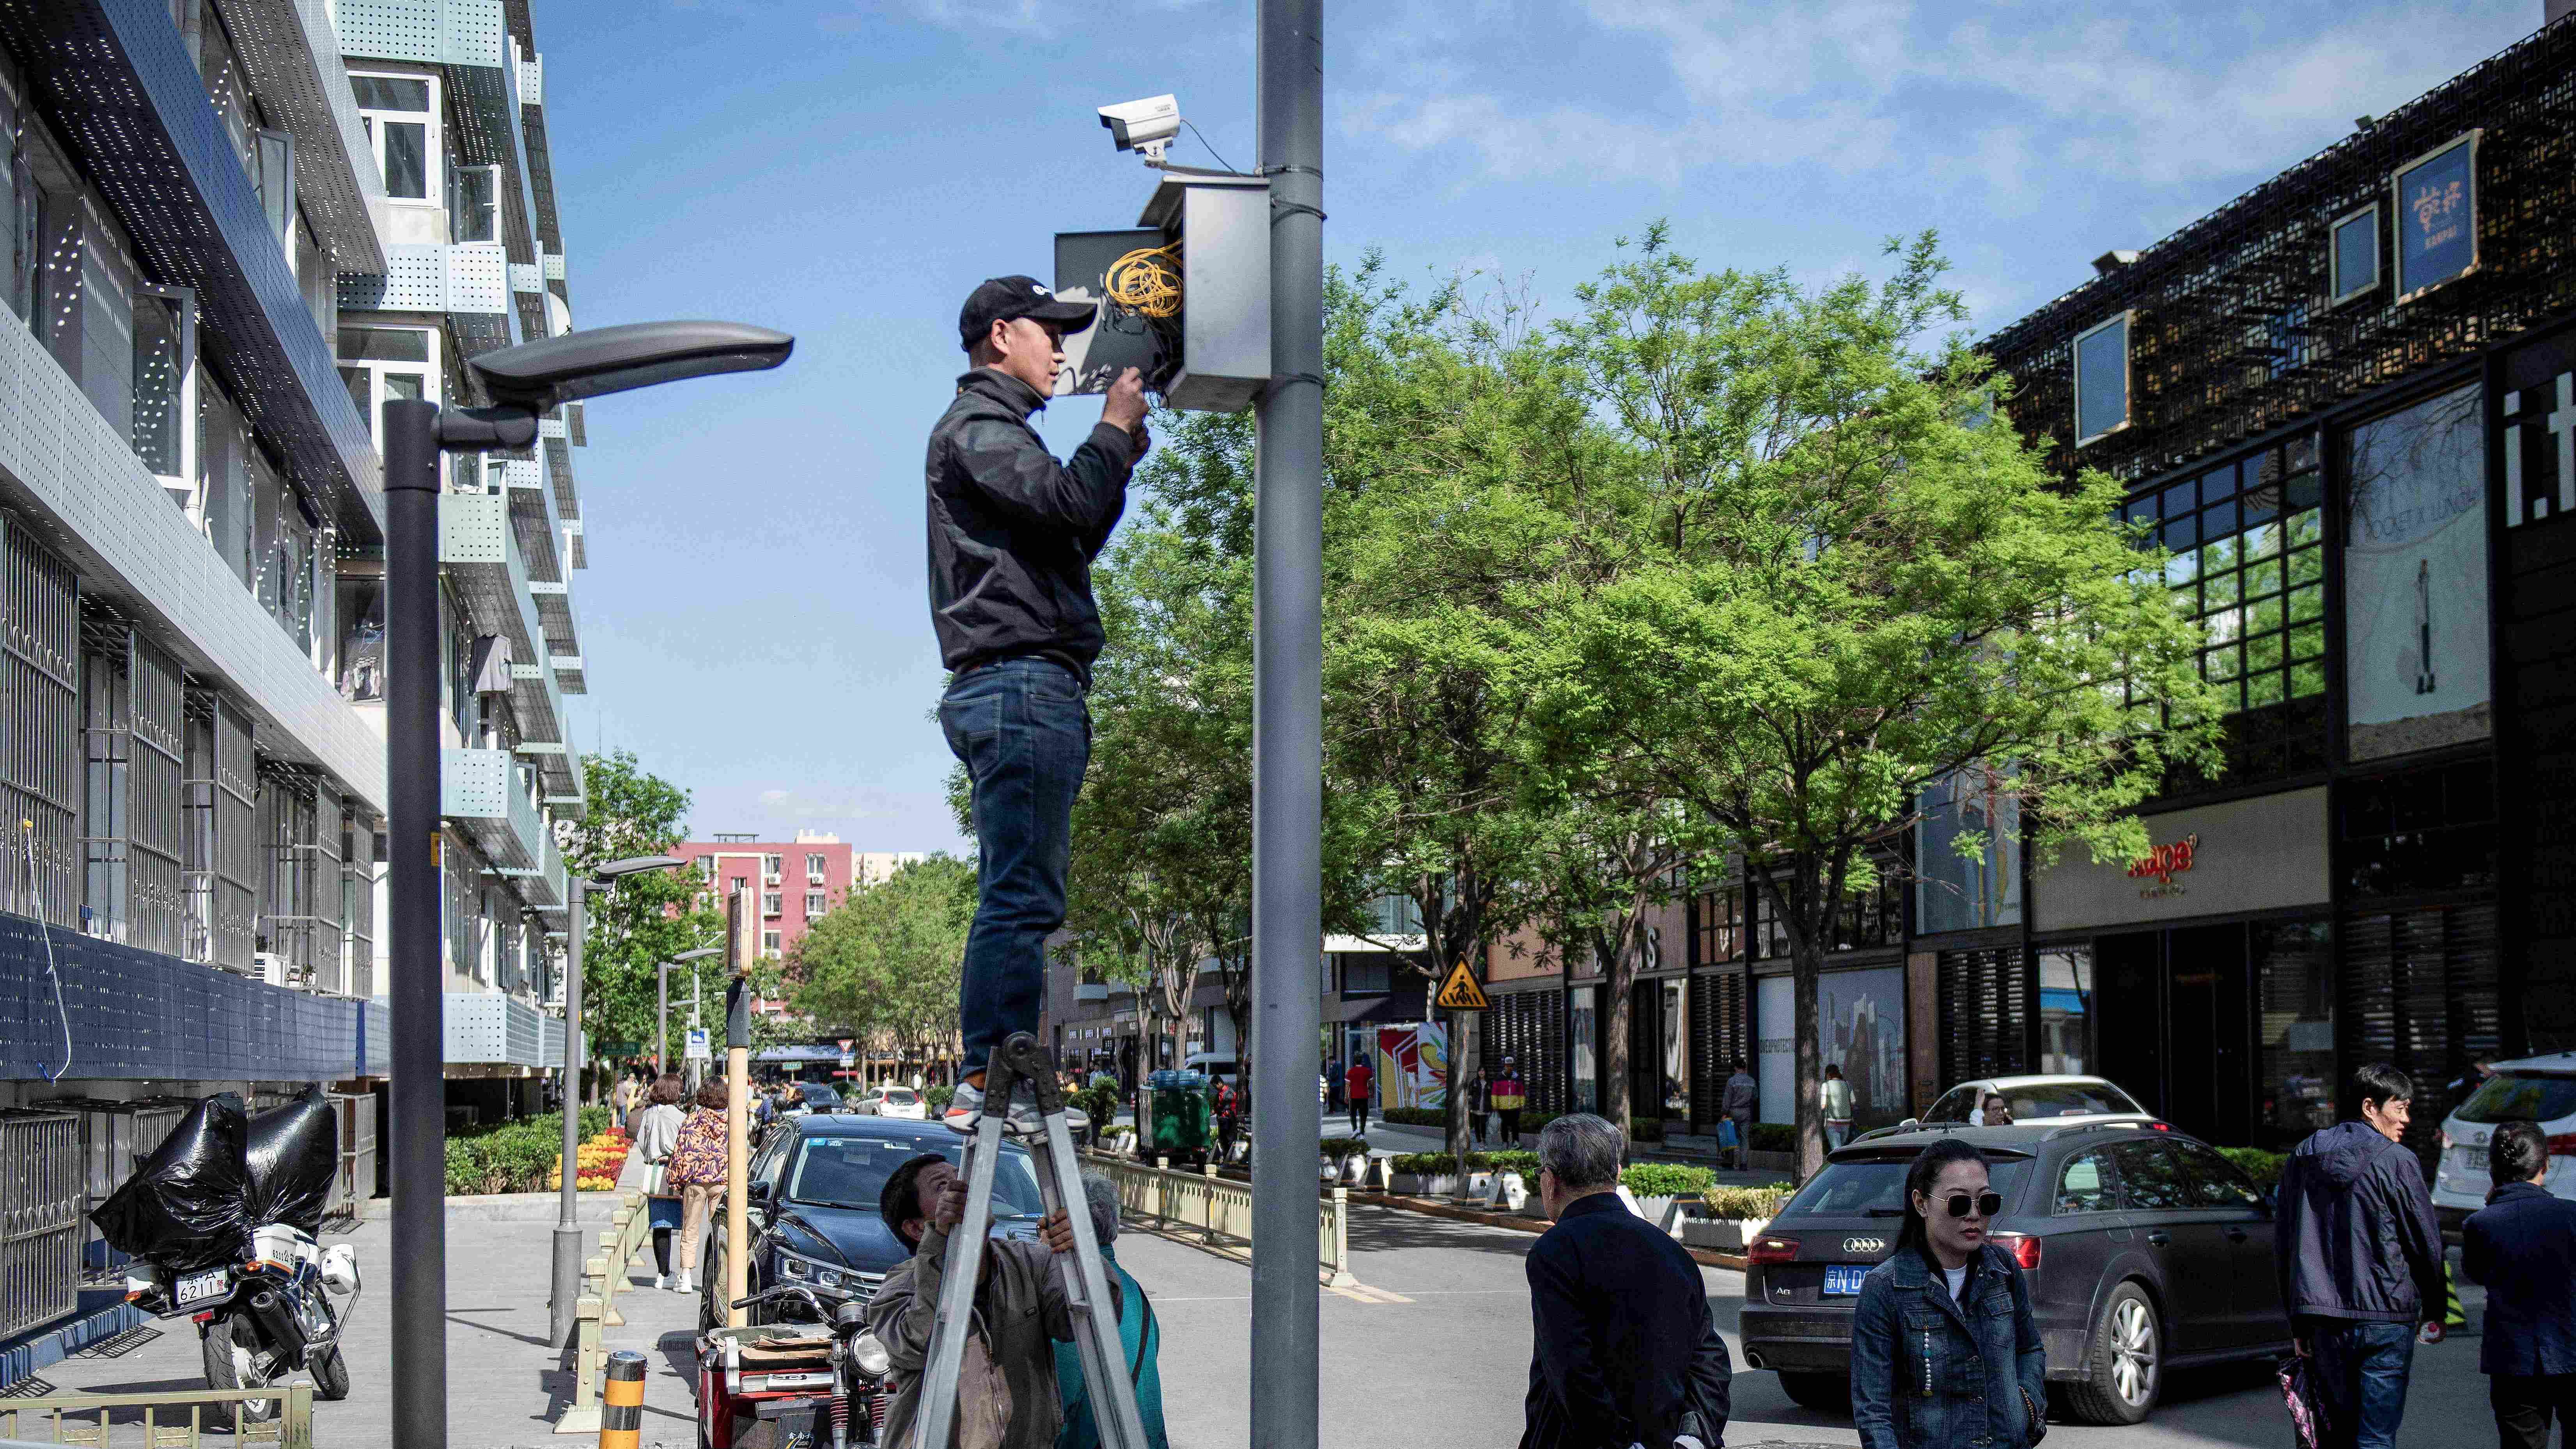 A worker installs a closed circuit television (CCTV) camera along a street in Beijing. Credit: AFP Photo